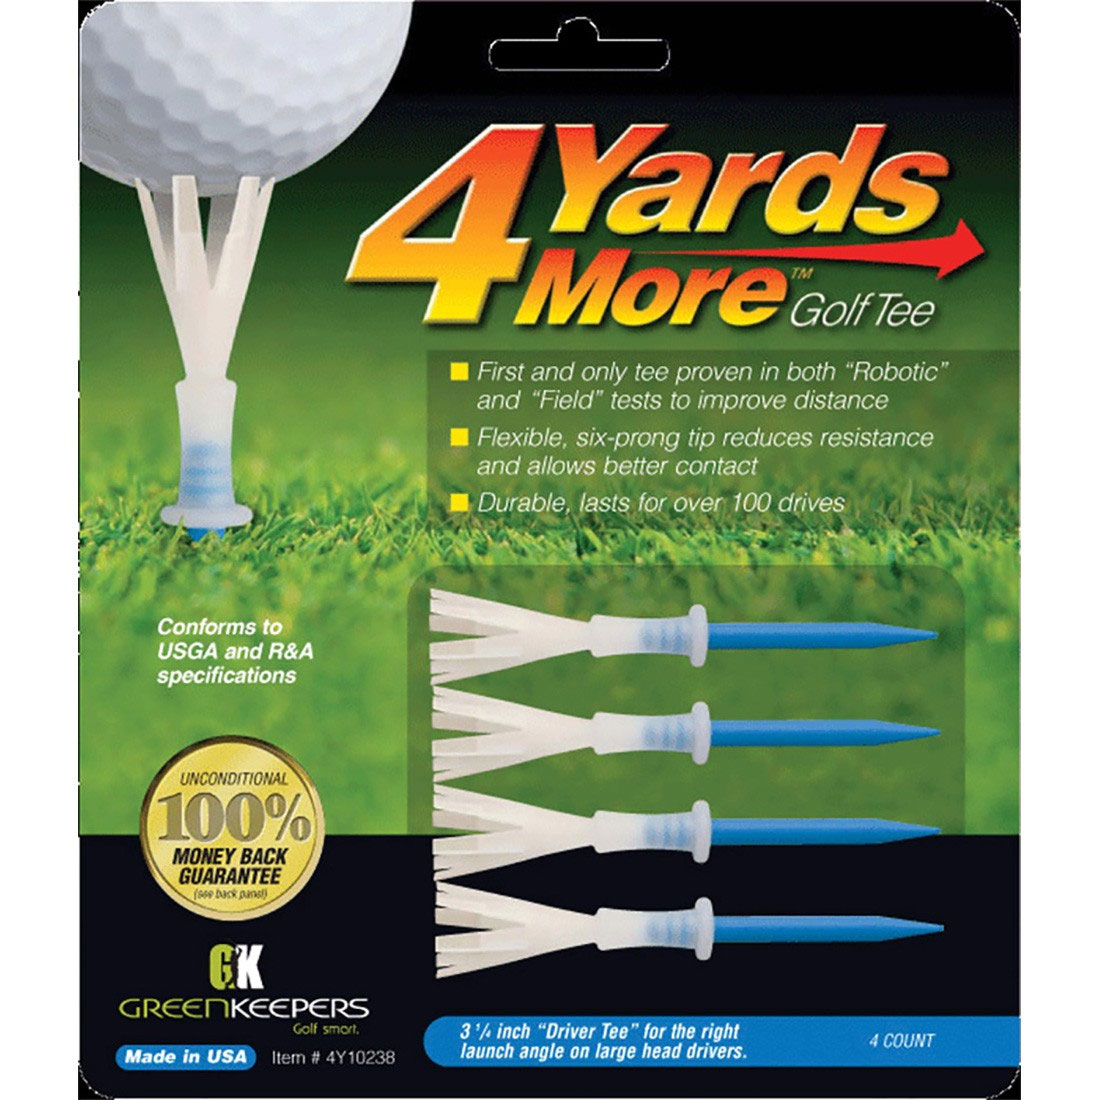 Green Keepers 4 Yards More 3 1/4" Golf Tee